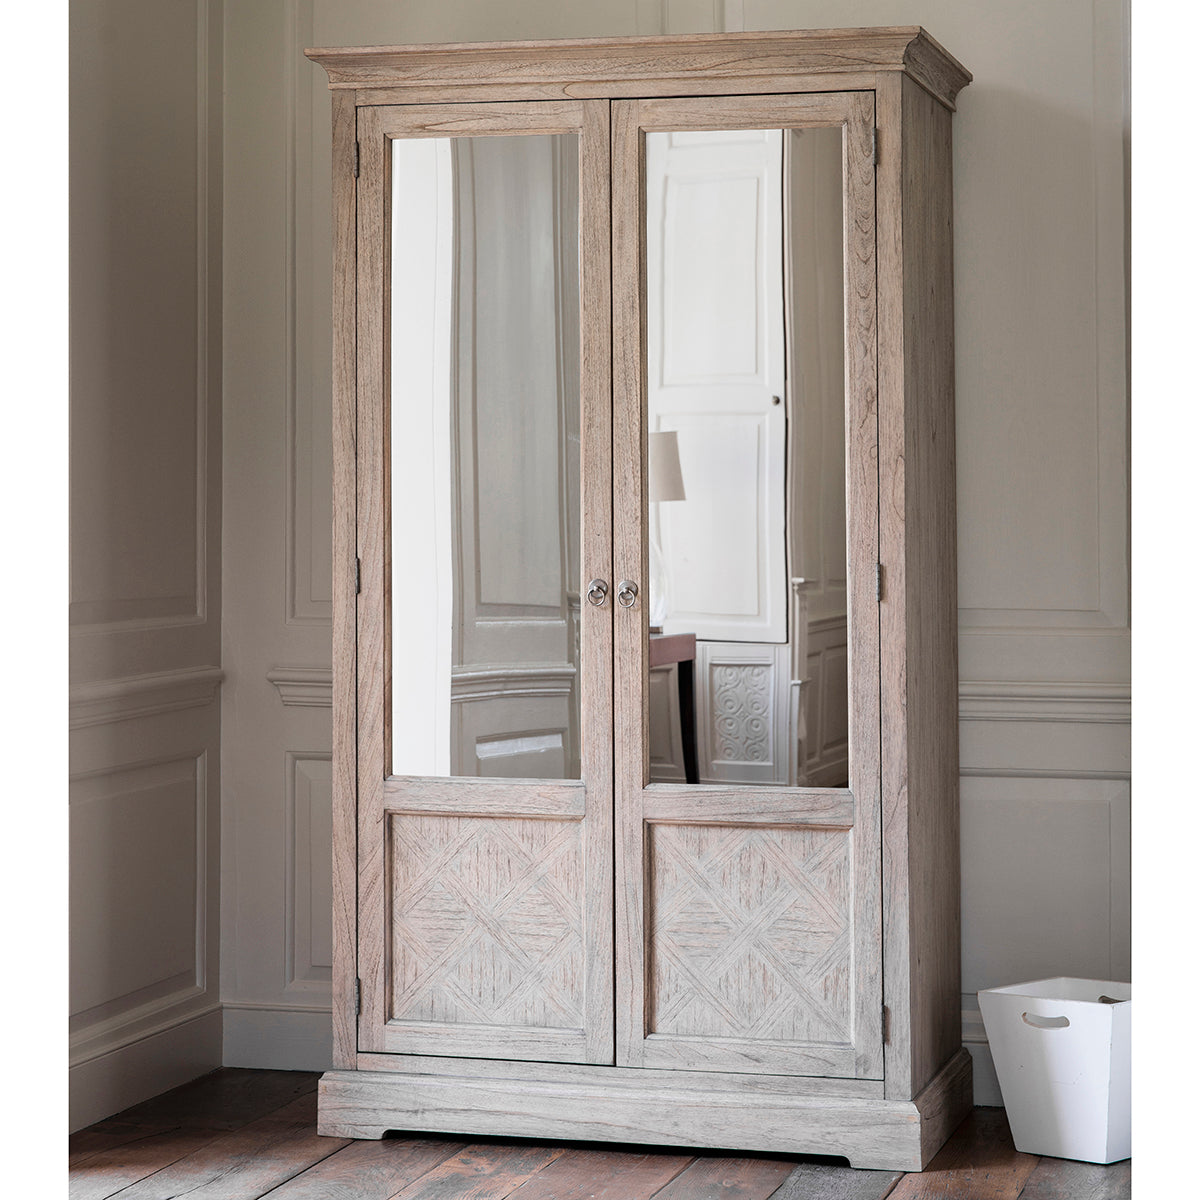 A wooden Belsford 2 Mirror Door Wardrobe 1112x606x1950mm with mirrored doors in a room for interior decor.